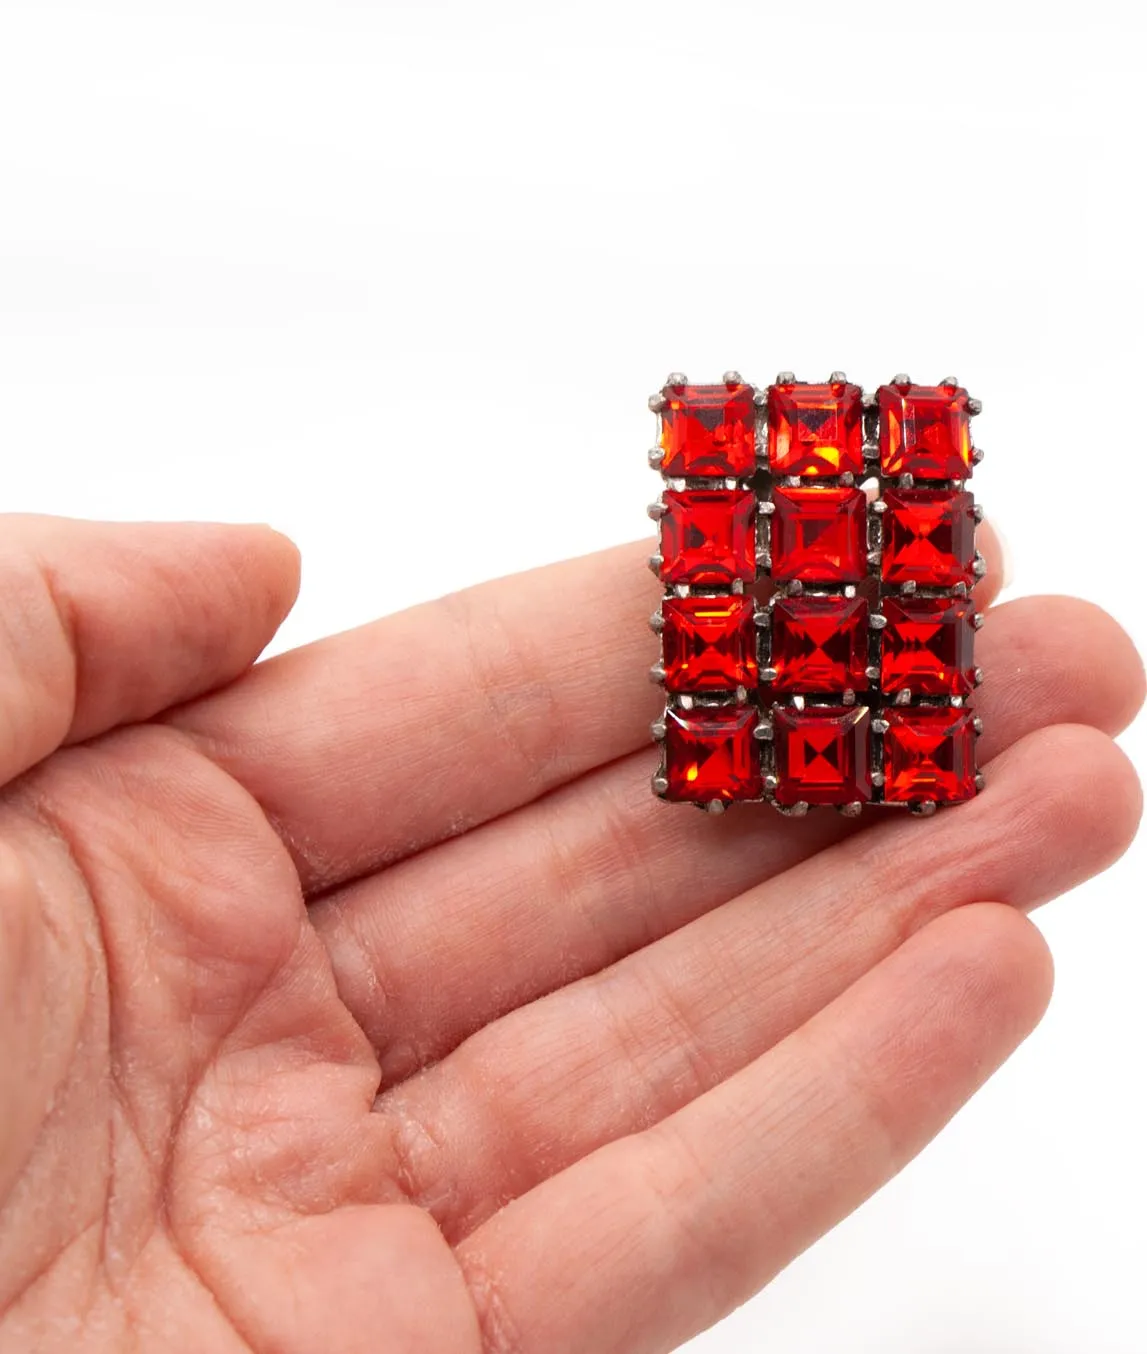 Red rectangular dress clip with square pastes held in a hand